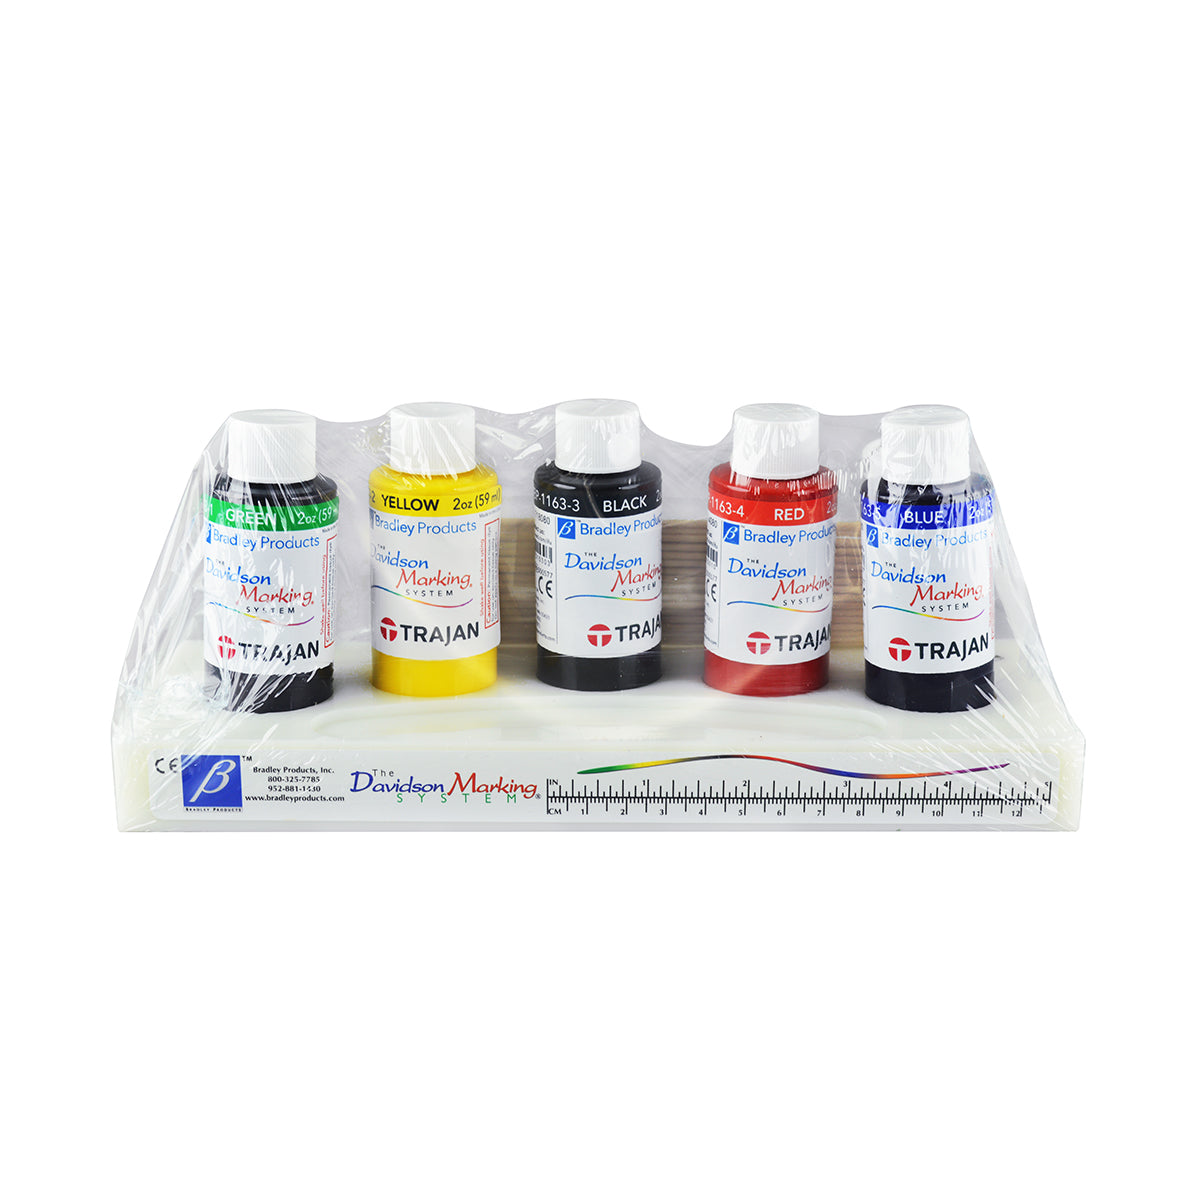 Davidson Marking System, Tissue Marking Dye 5-Color Set of 2 oz bottles with plastic tray (green, yellow, black, red, blue)